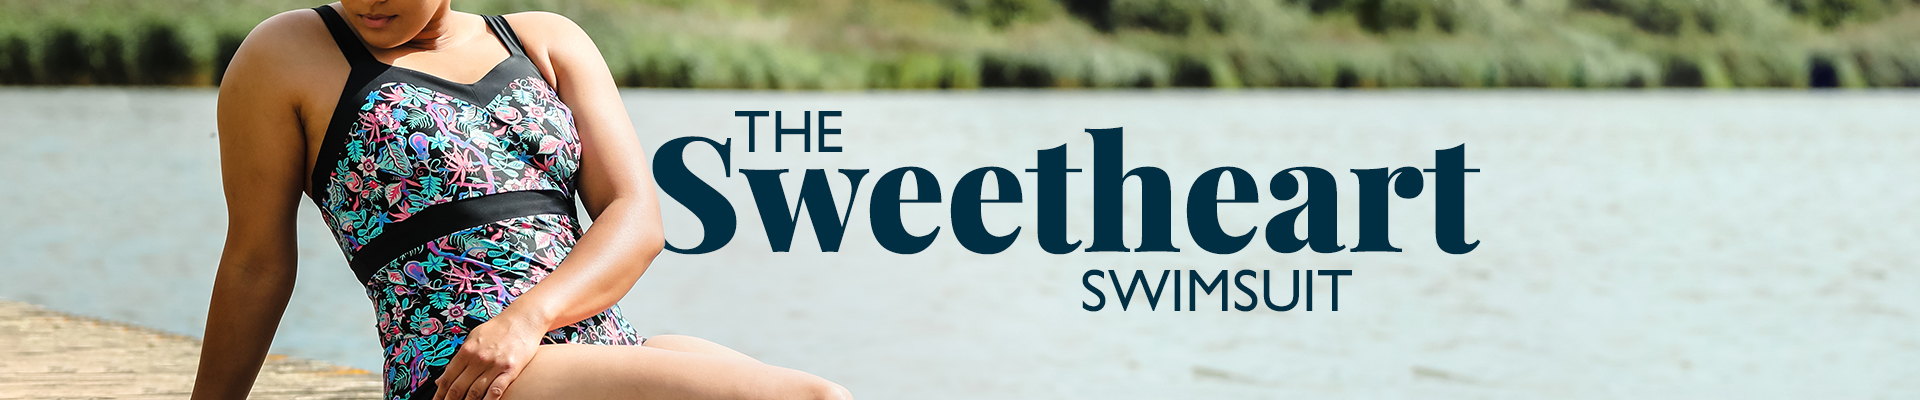 The Sweetheart Swimsuit